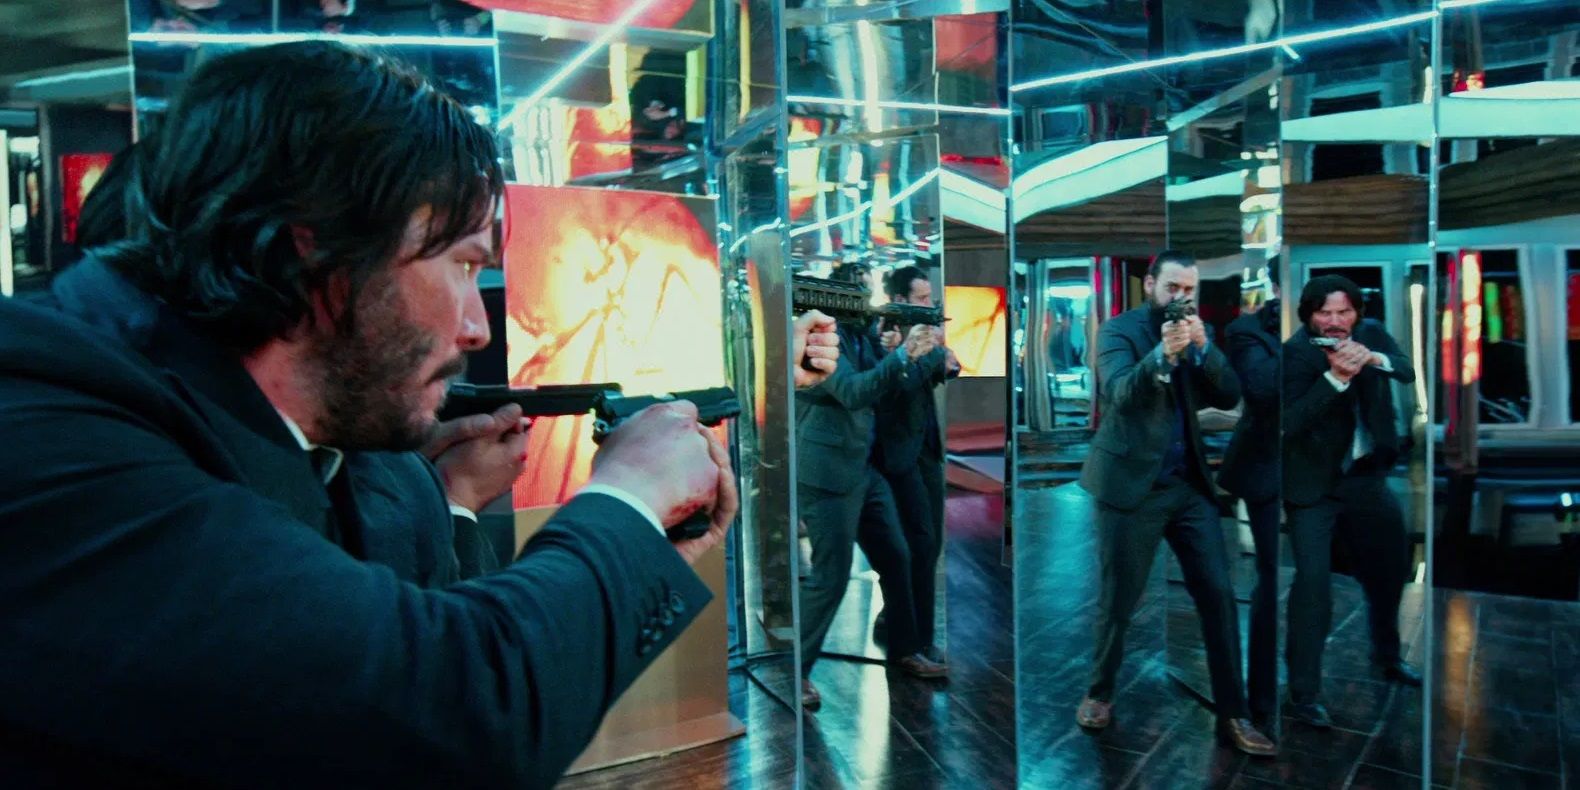 John Wick enters a hall of mirrors